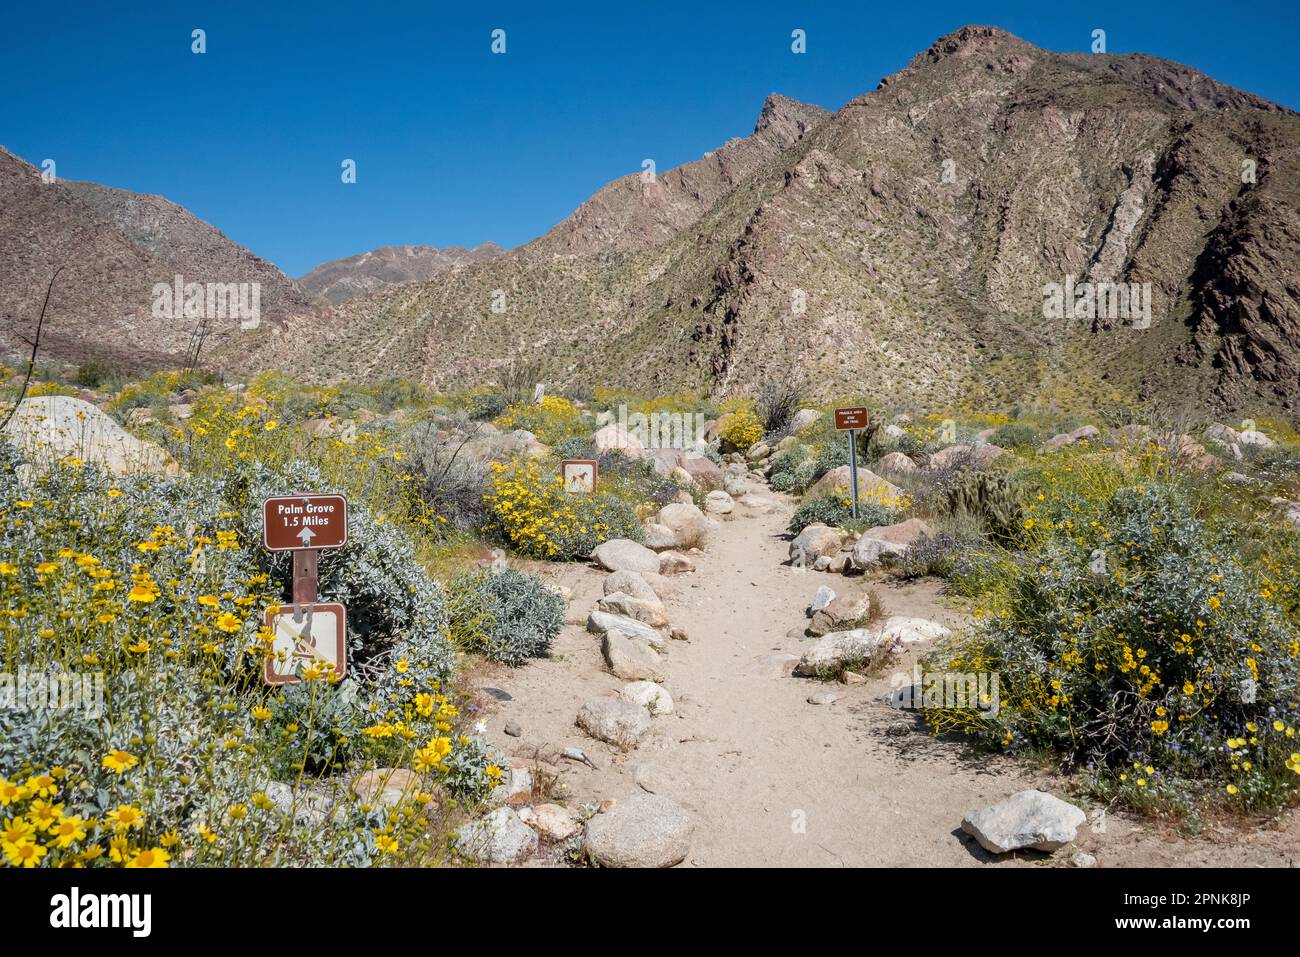 Trailhead with sign for Palm Grove. Borrego Palm Canyon hiking trail with yellow brittlebush wildflowers in spring and trail leading to mountains. Stock Photo